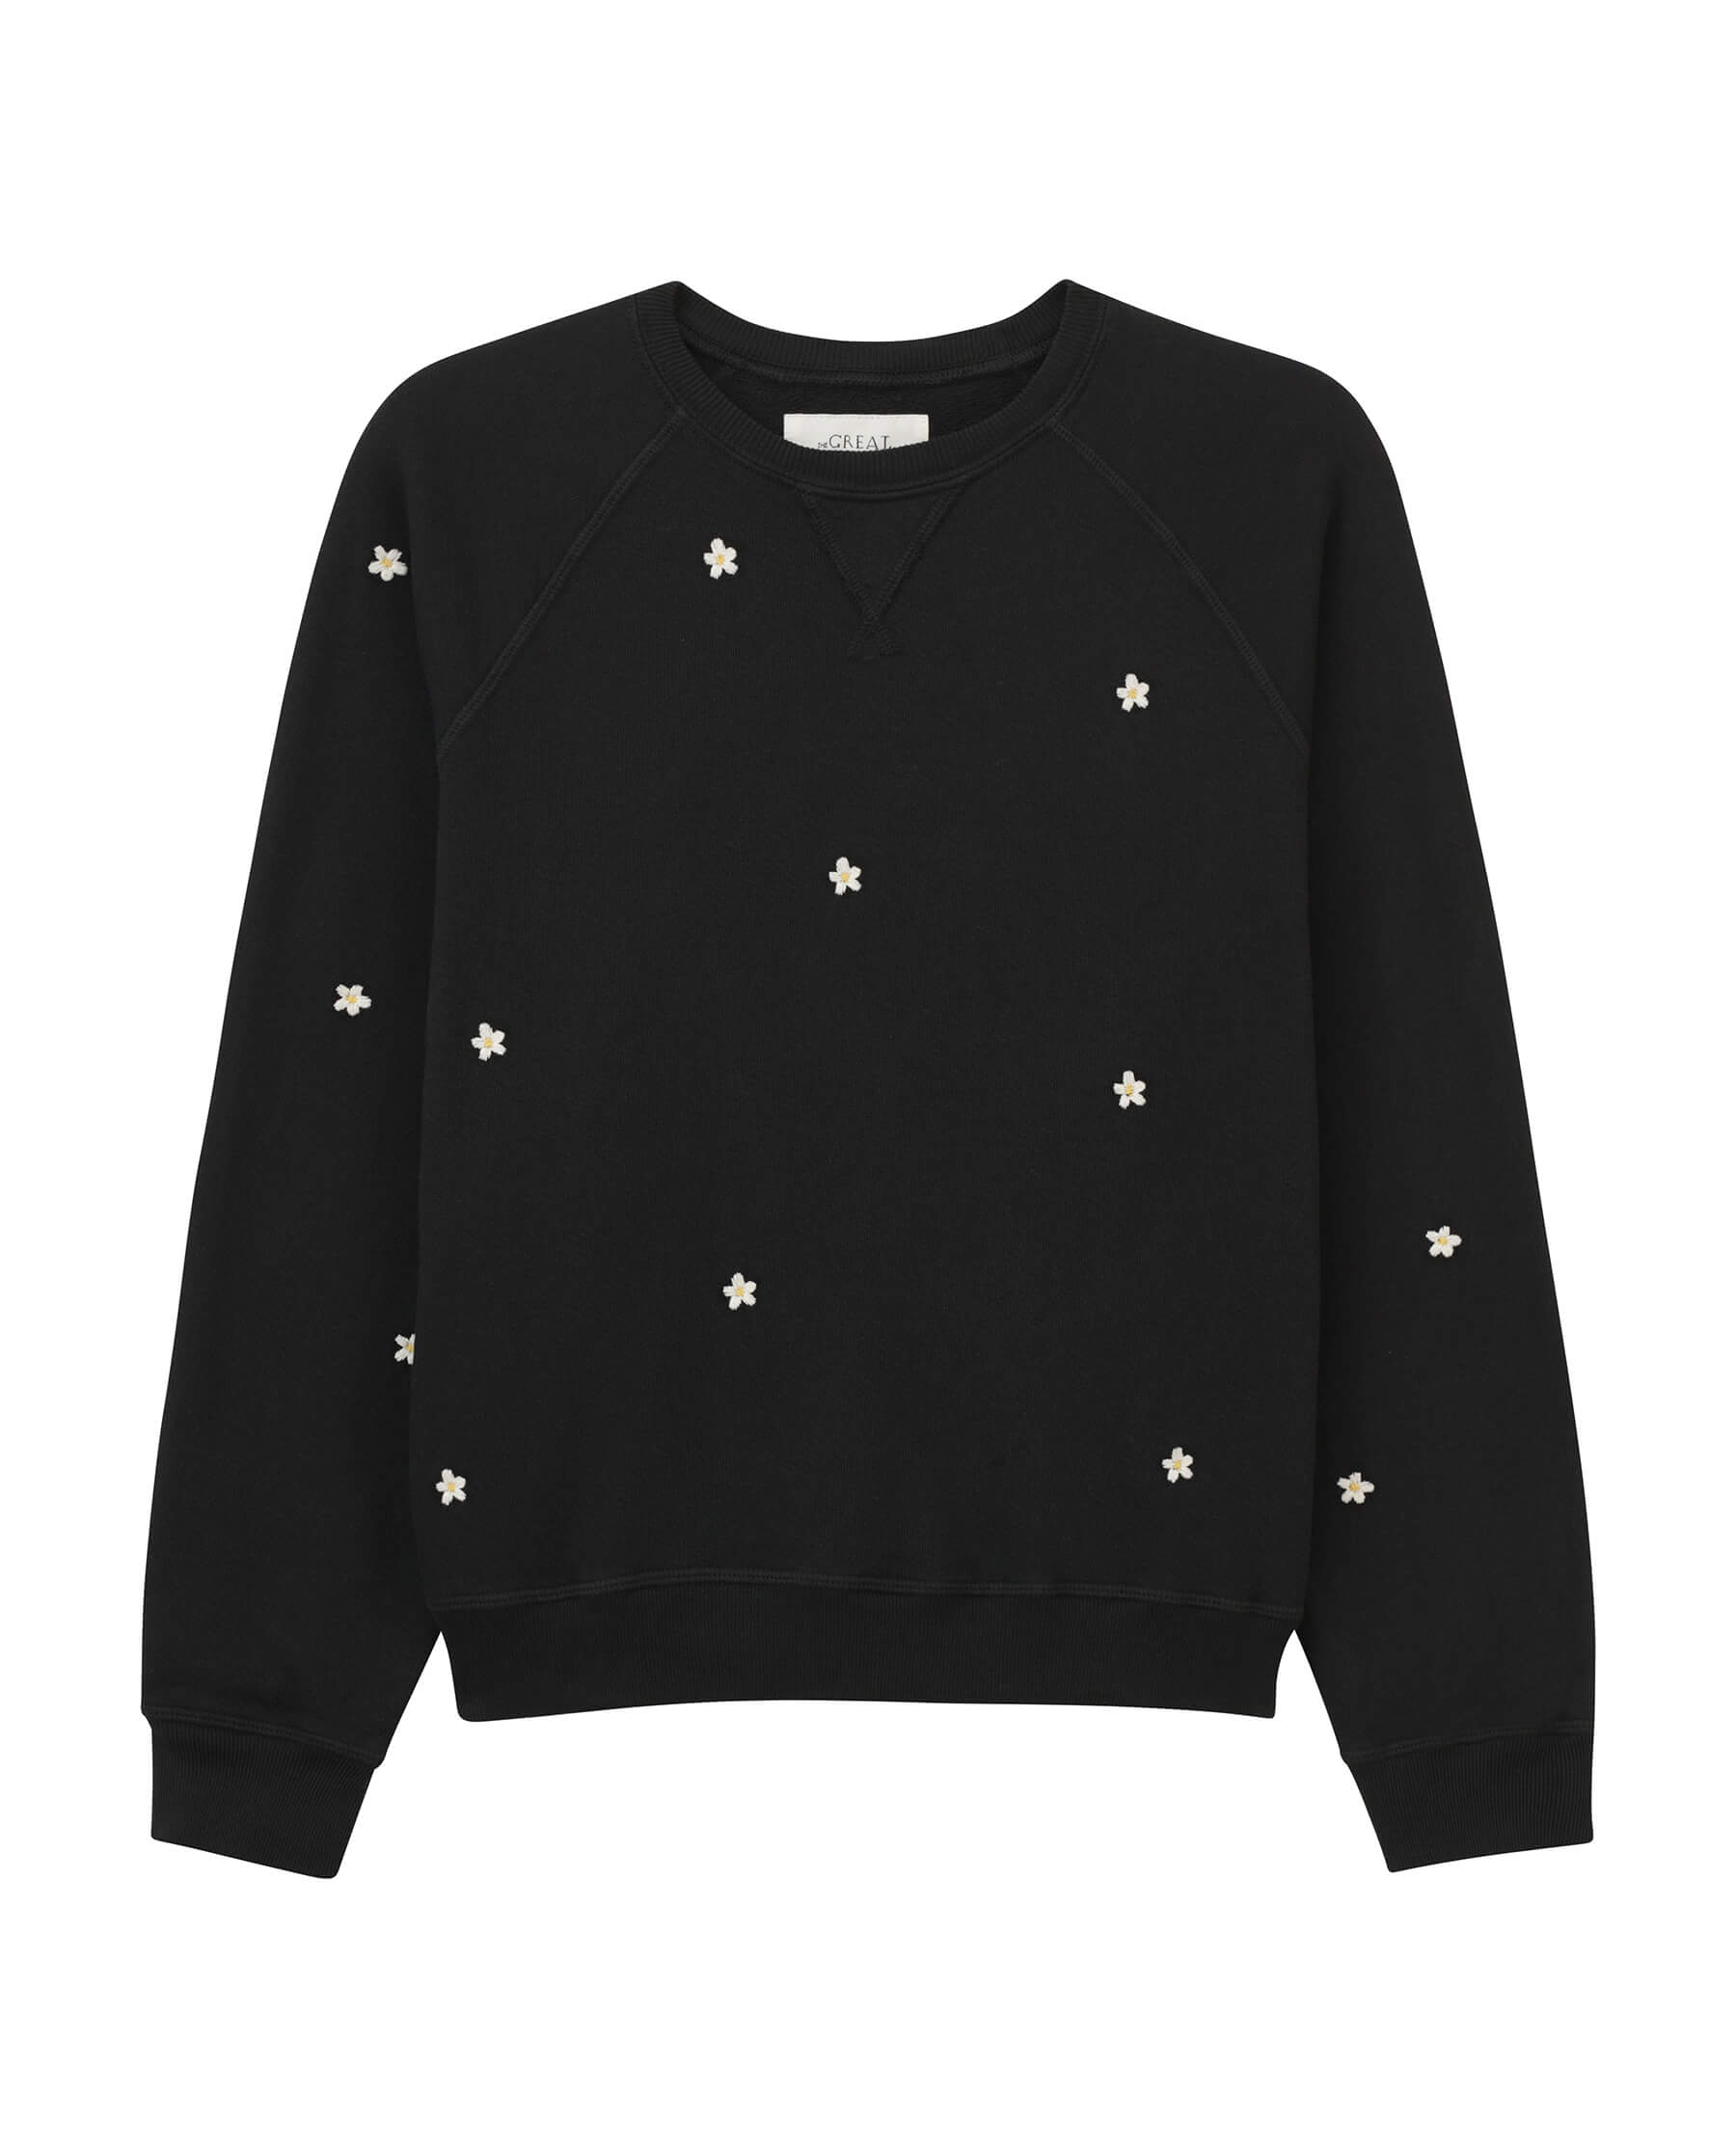 The Slouch Sweatshirt. Embroidered -- Almost Black with Cream Flowers